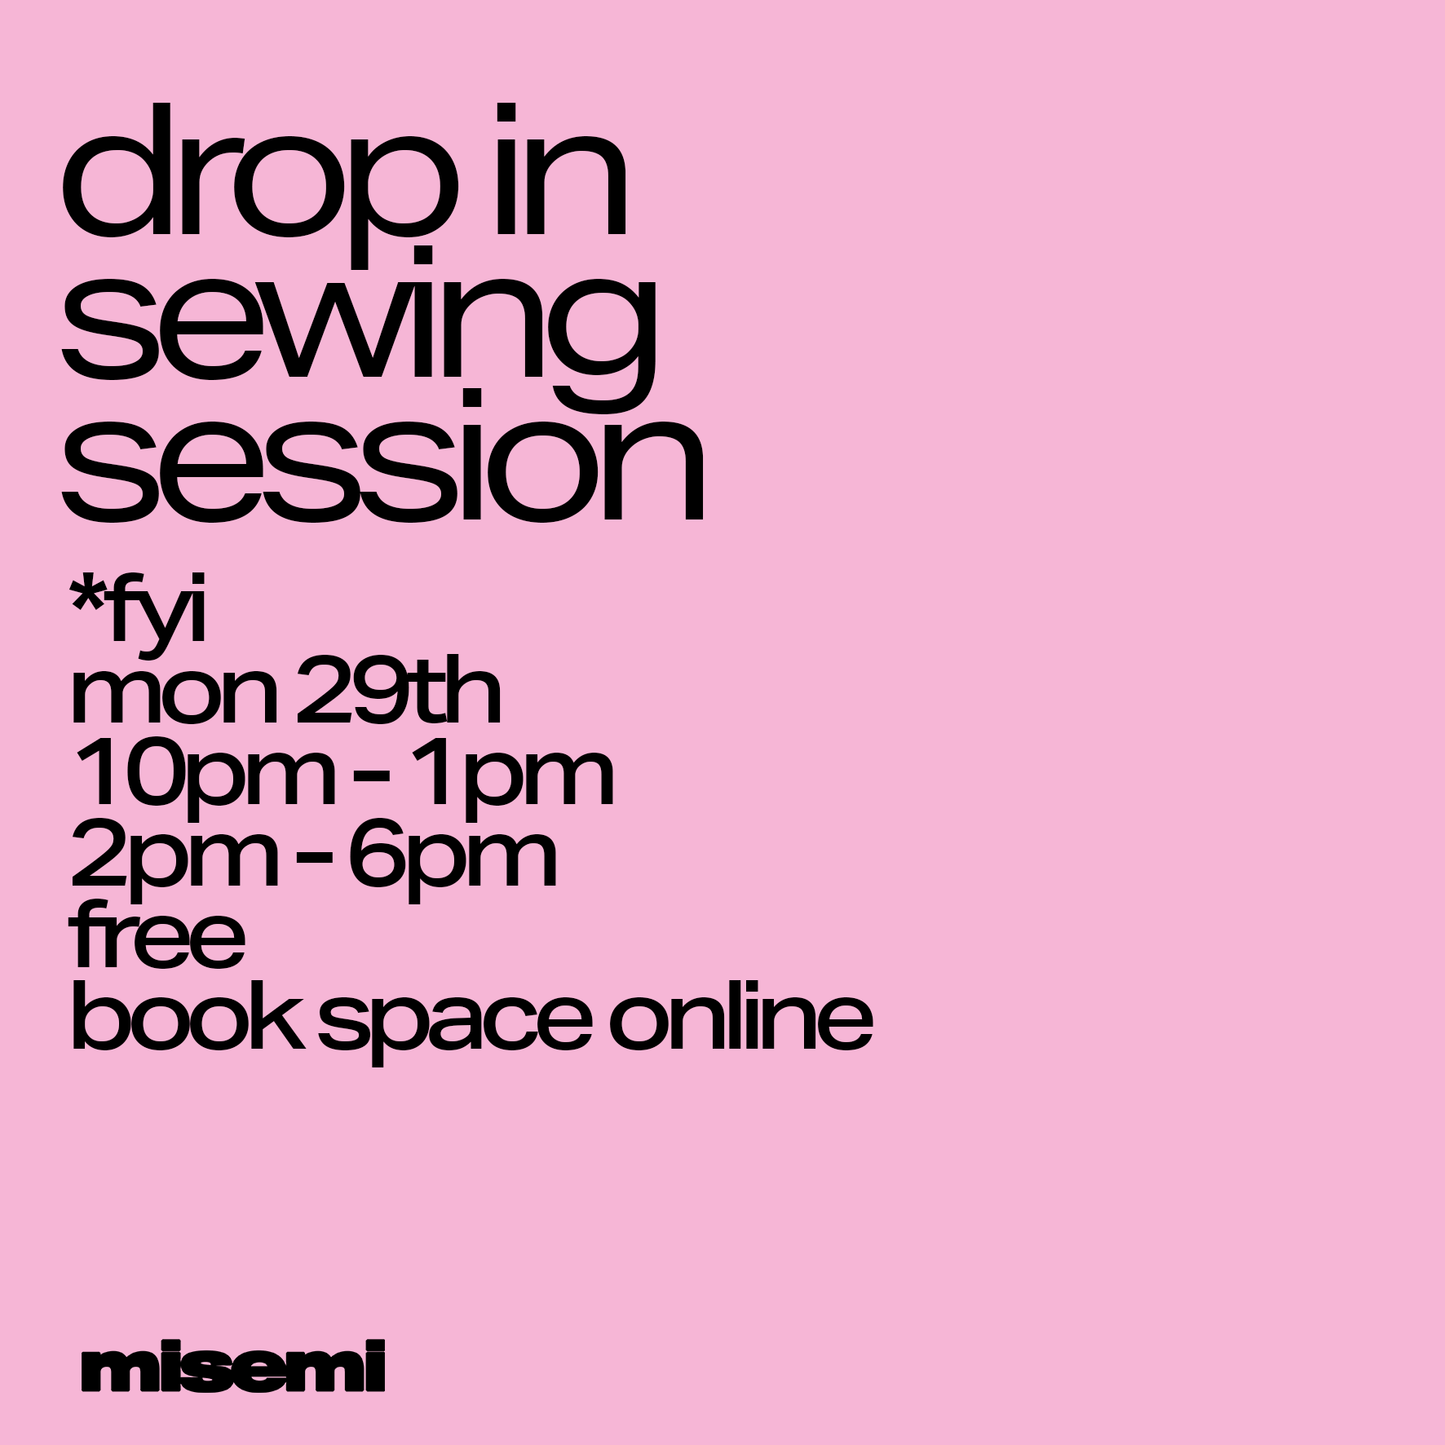 Drop in Sewing Session - May